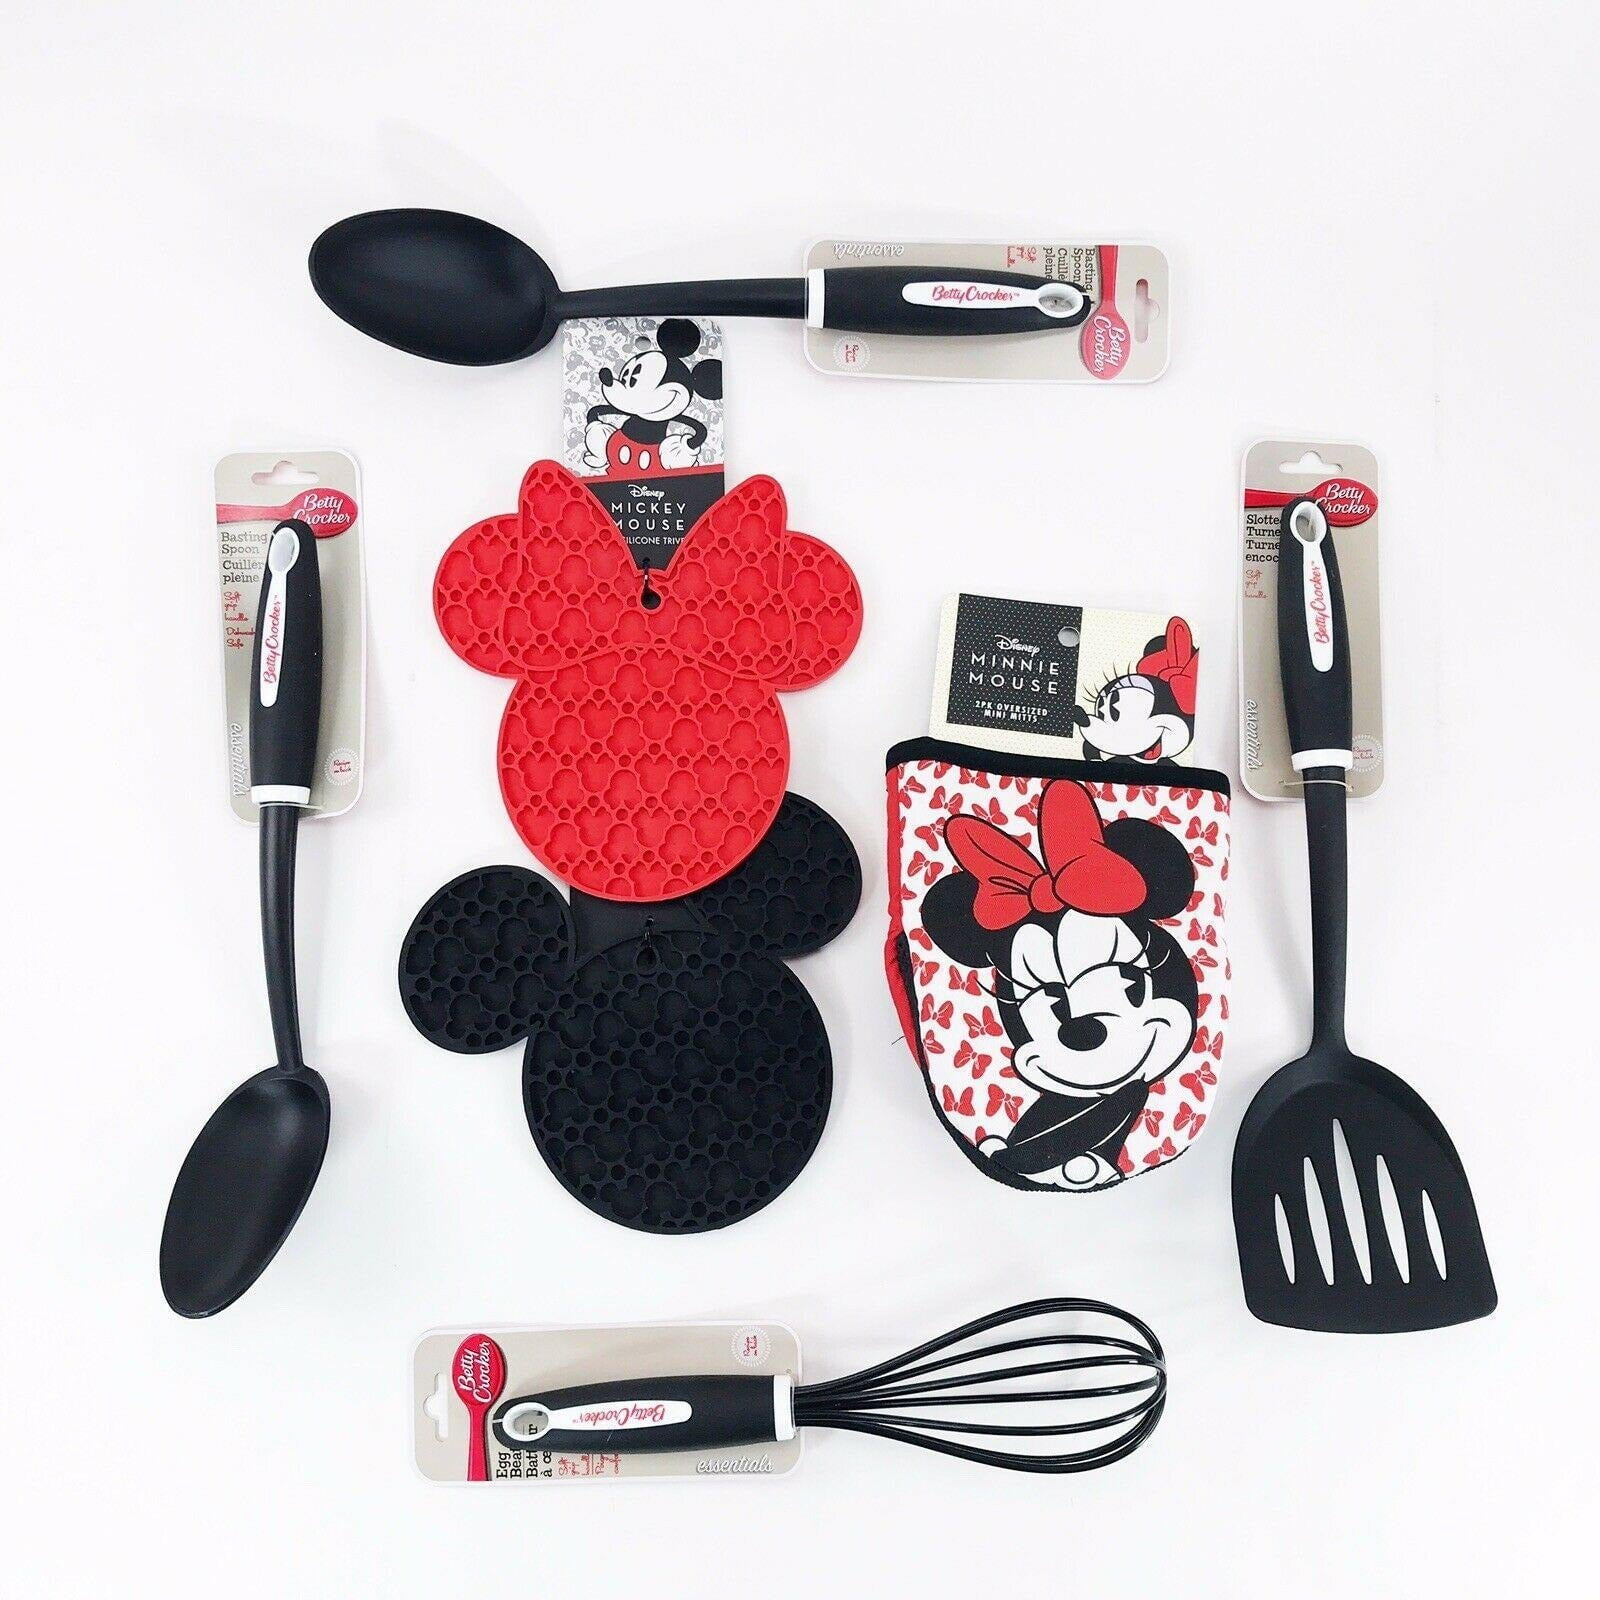 Disney Kitchen Gift Set Oven Mitts Utensils Minnie Mouse Cook Mom